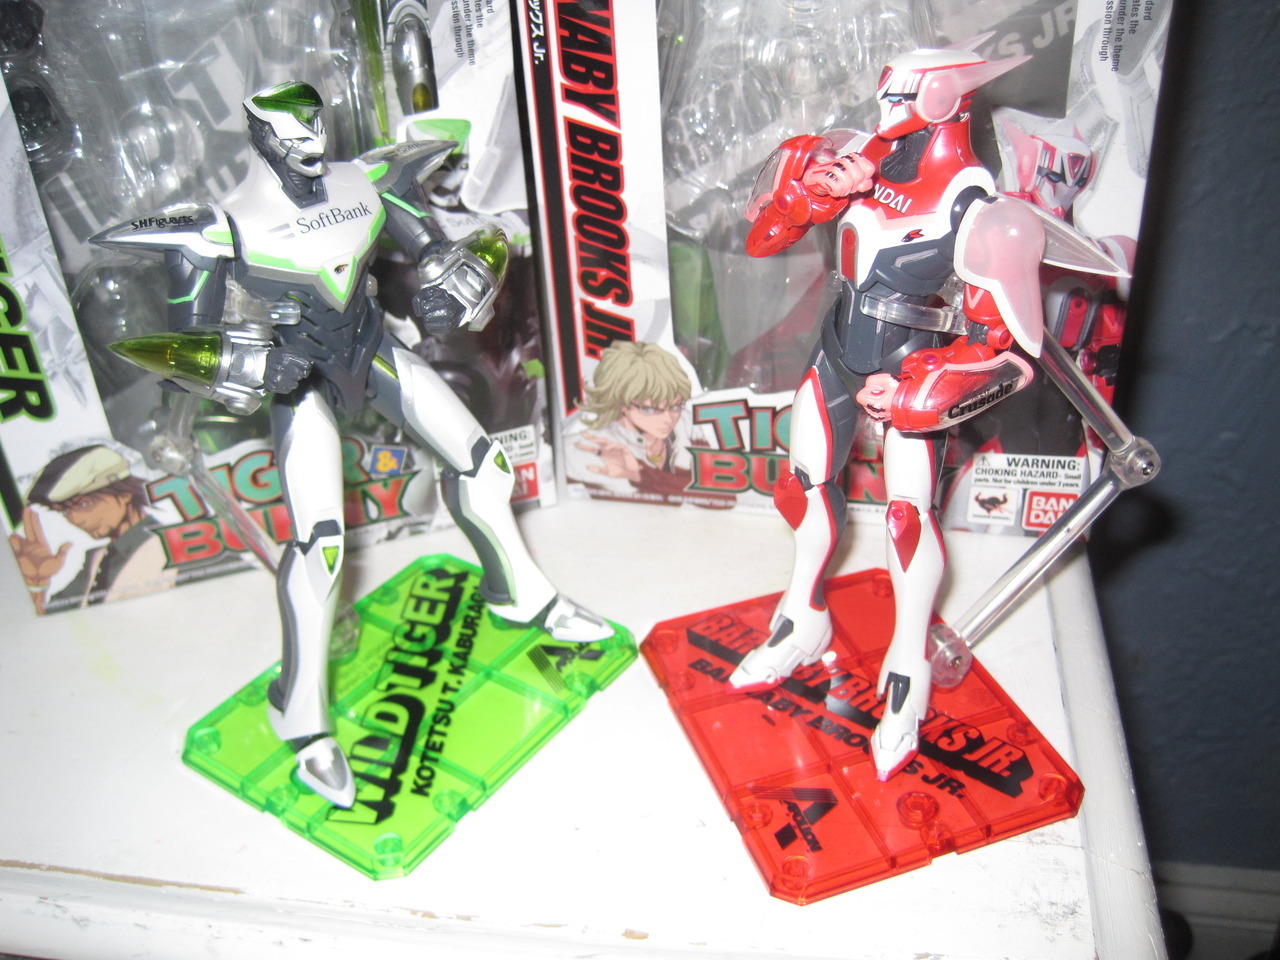 So on the topic of collectibles, I took some pictures of my Tiger &amp; Bunny